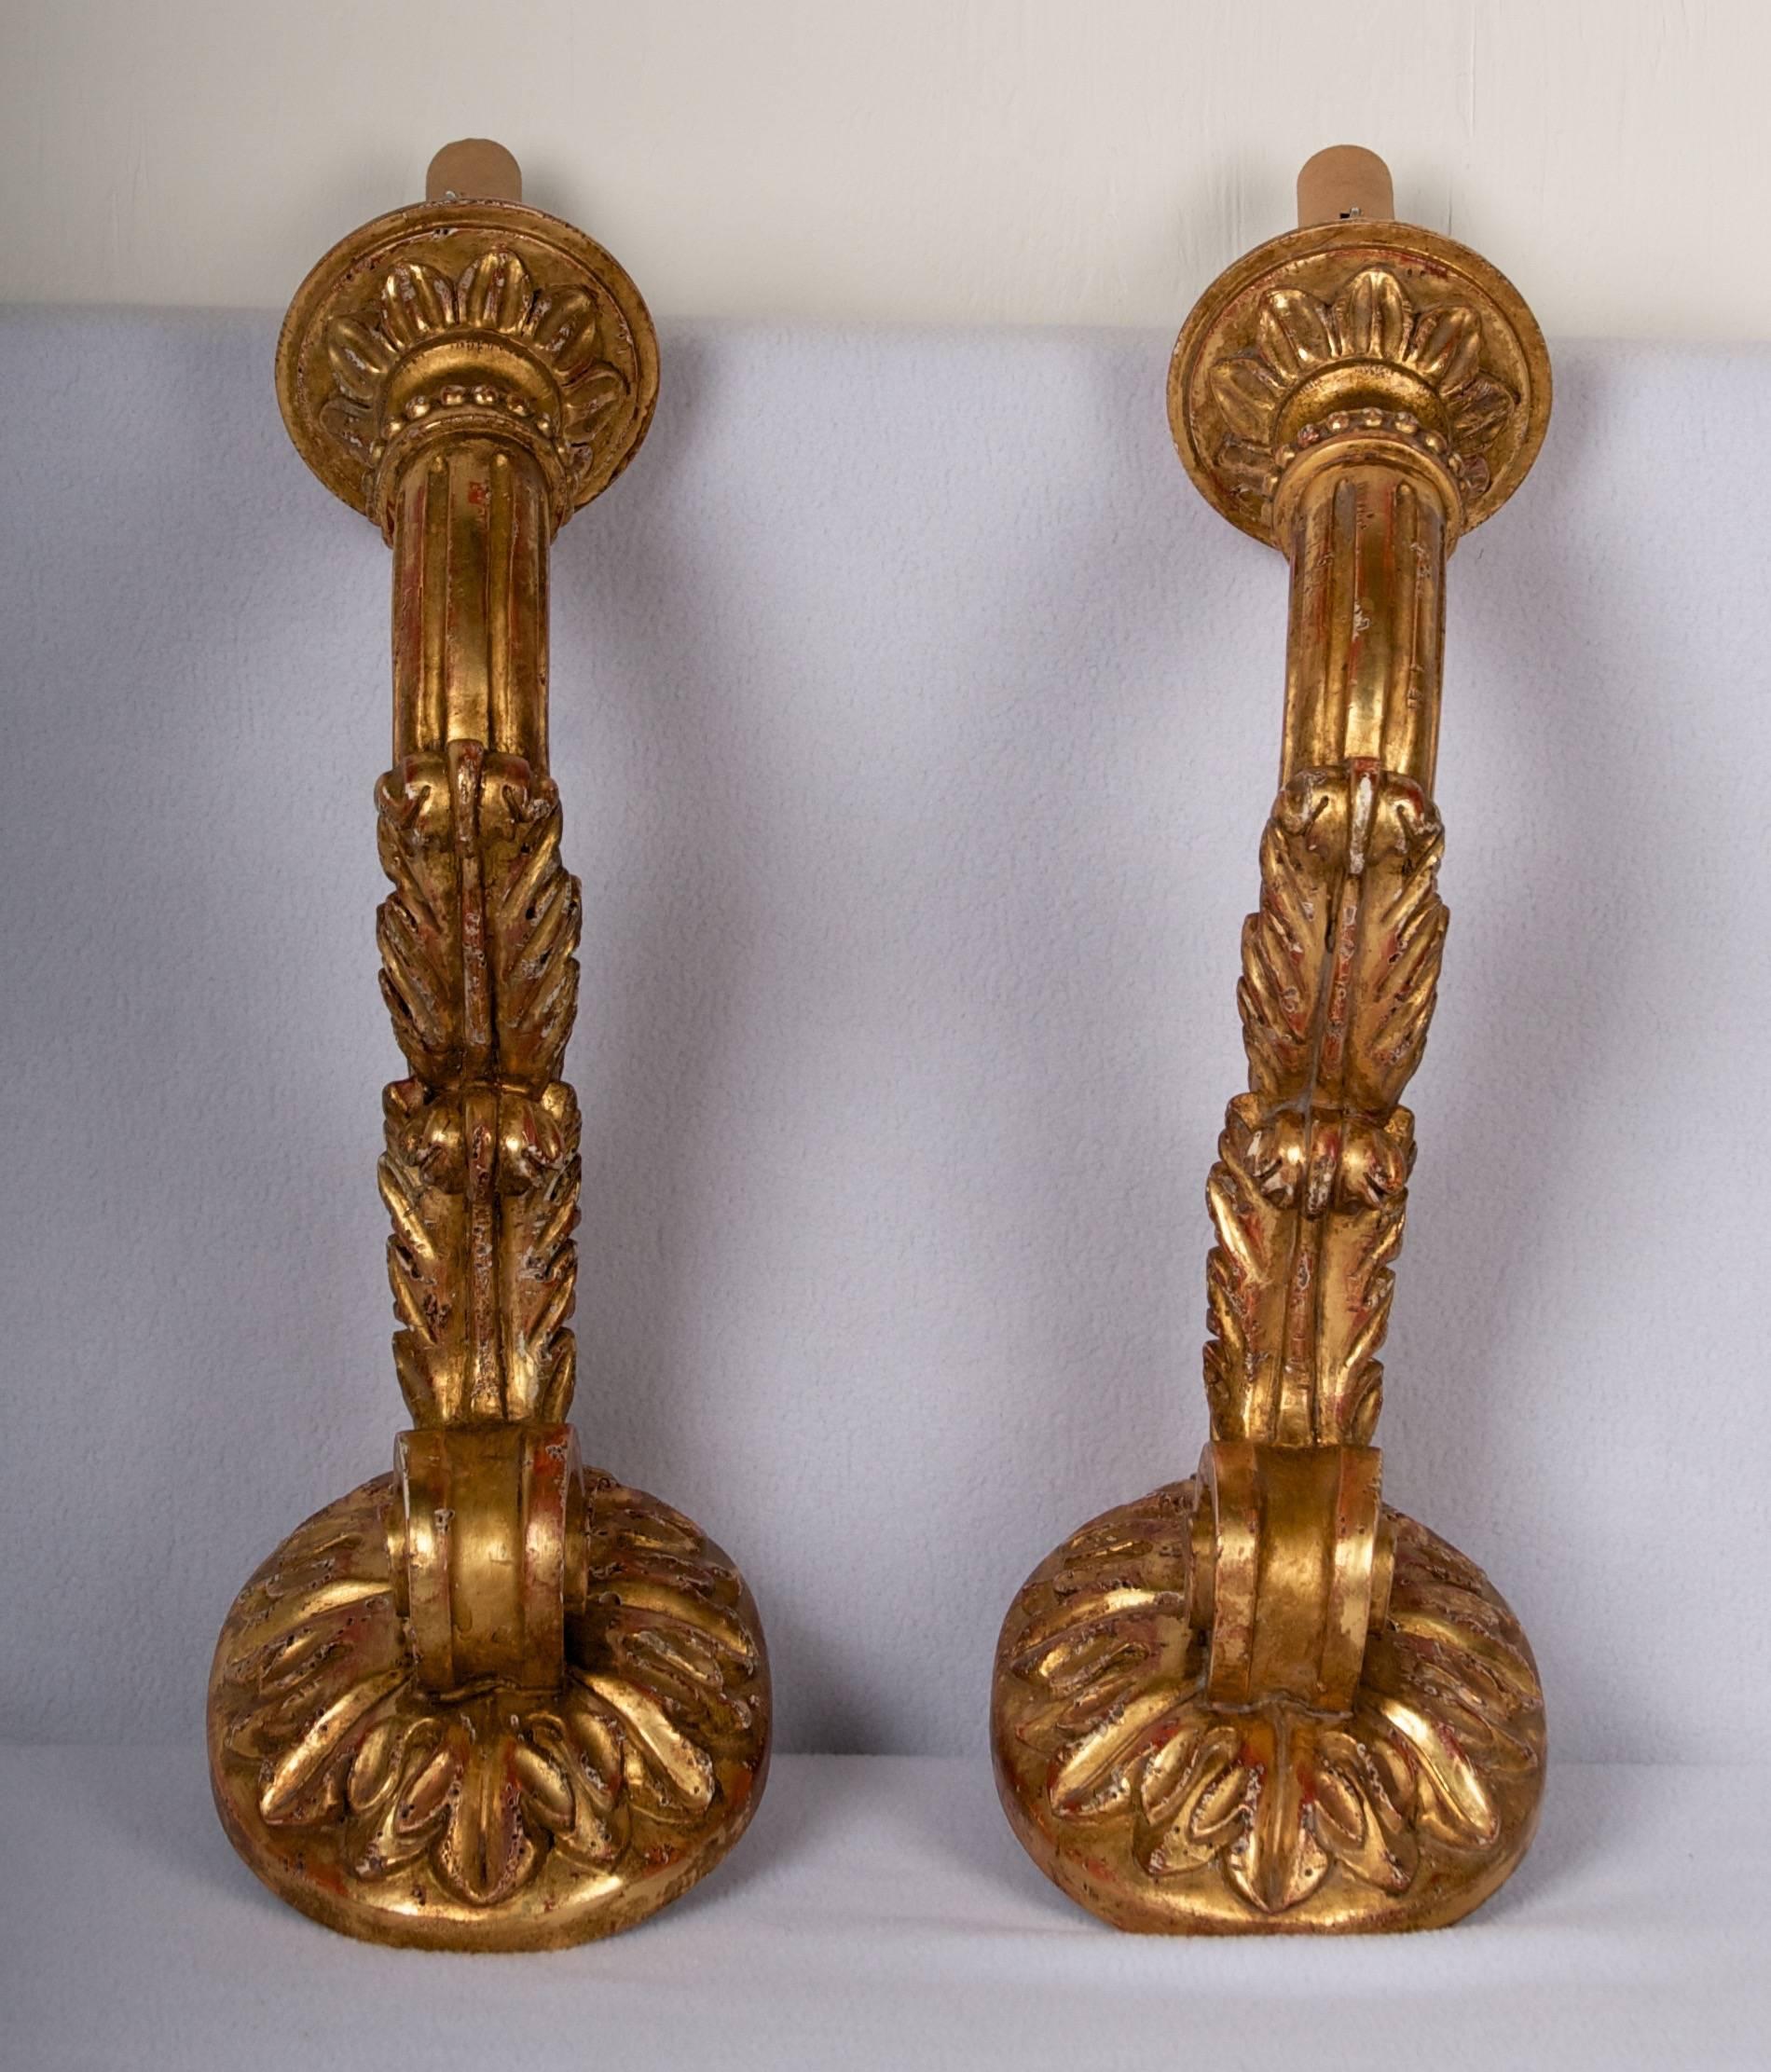 Grand pair of sconces, lovely detail carving, ready for direct wire mount.
These sconces are in perfect condition.